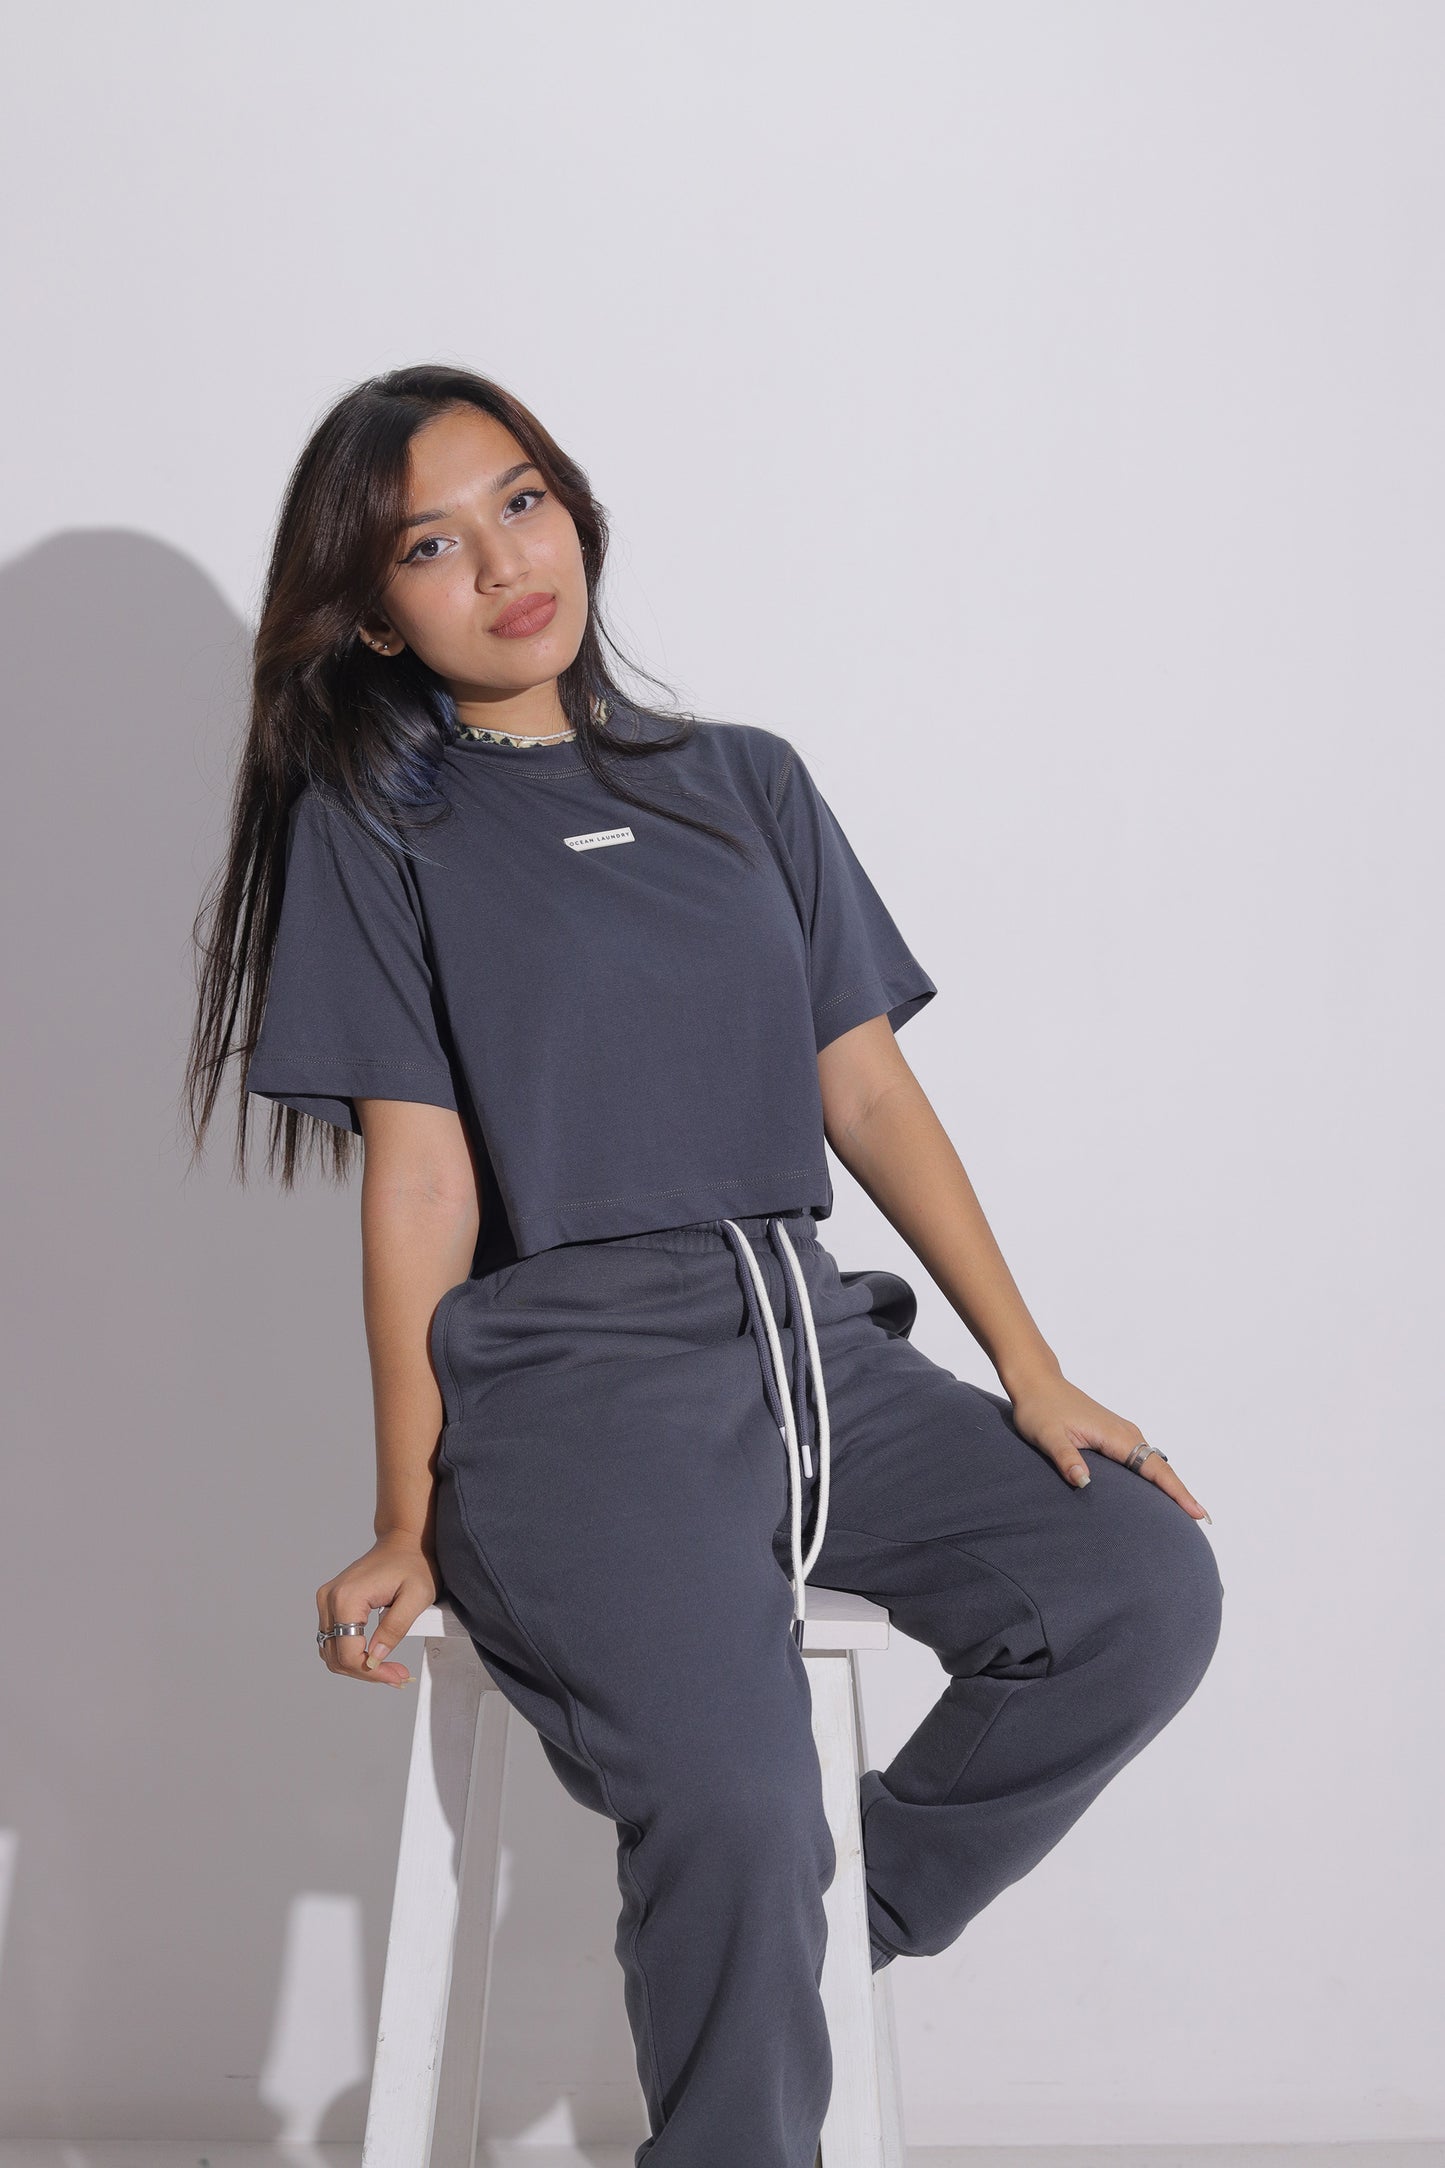 Cactus Baggy Sweatpants for Women - Charcoal